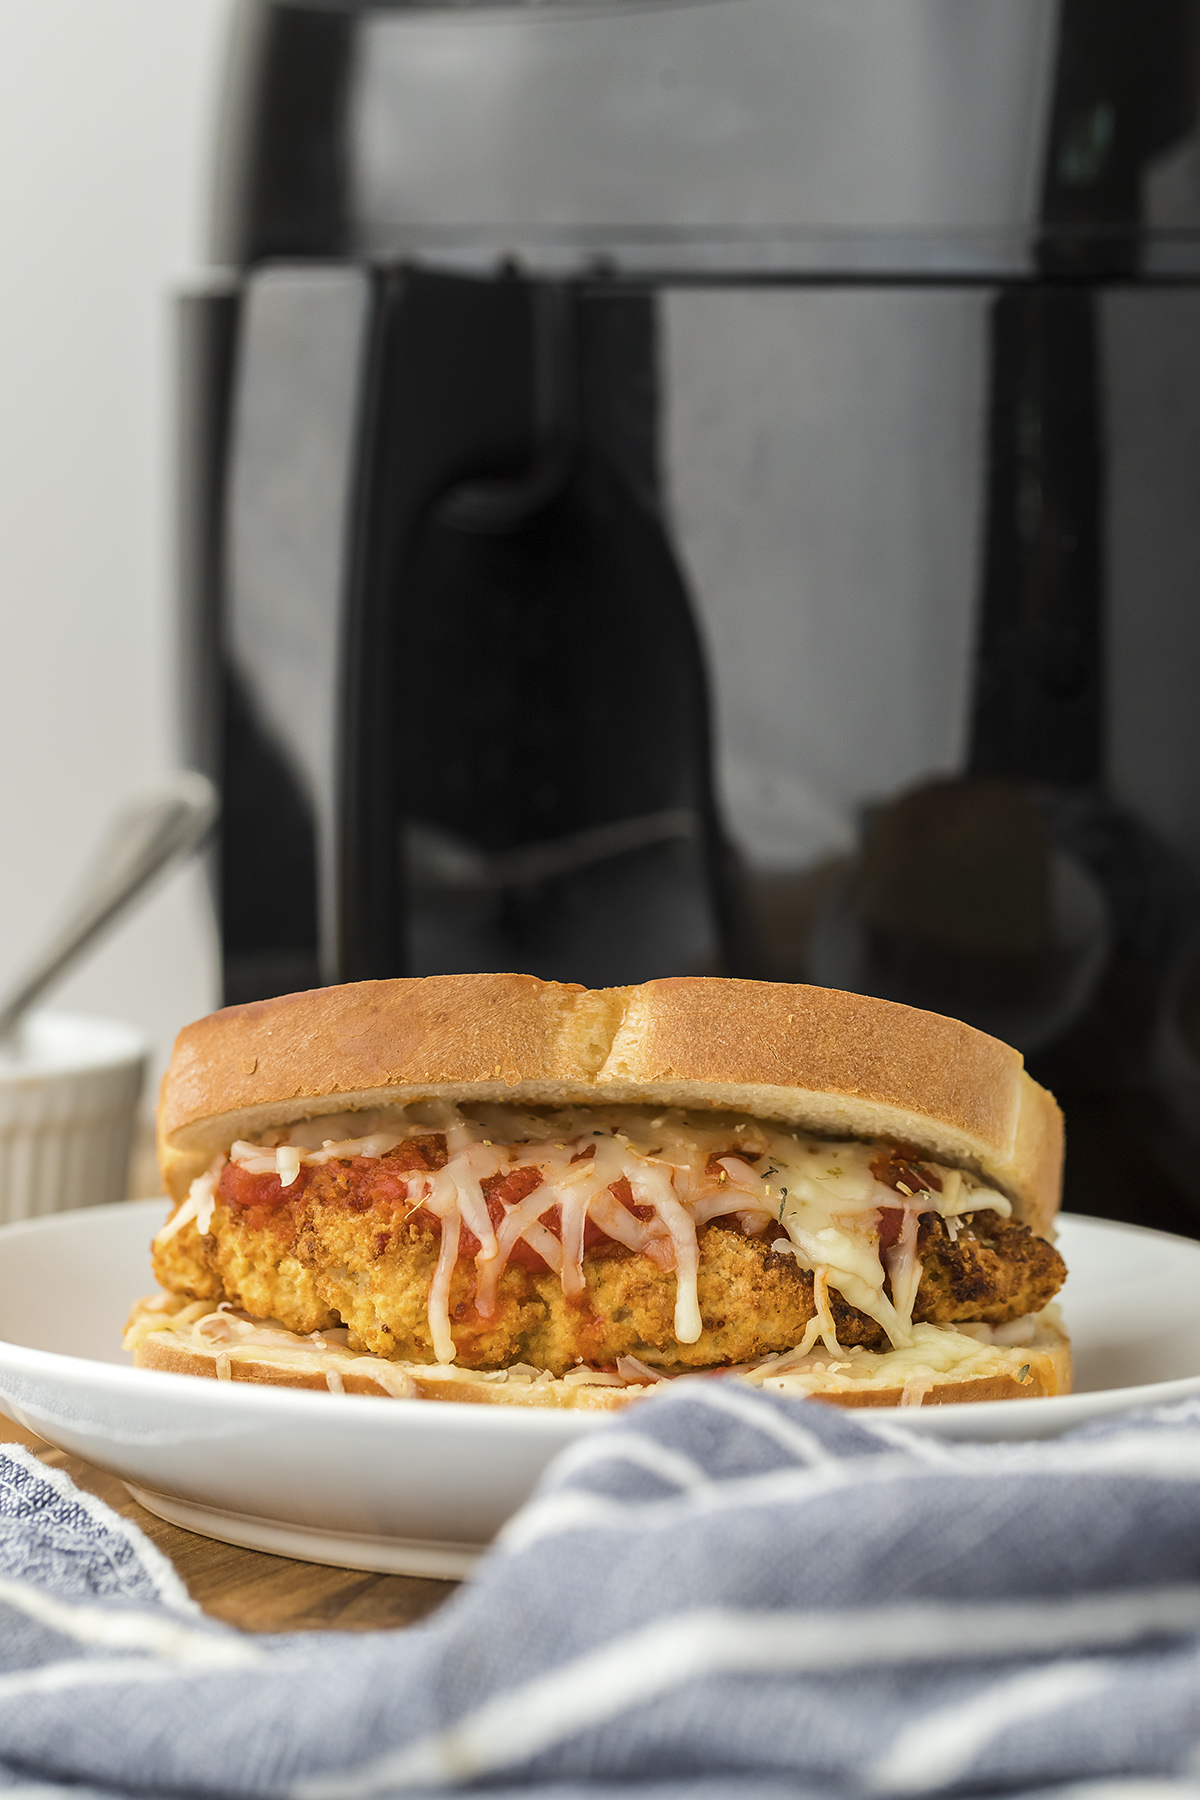 Chicken parmesan sandwich on white plate in front of air fryer.